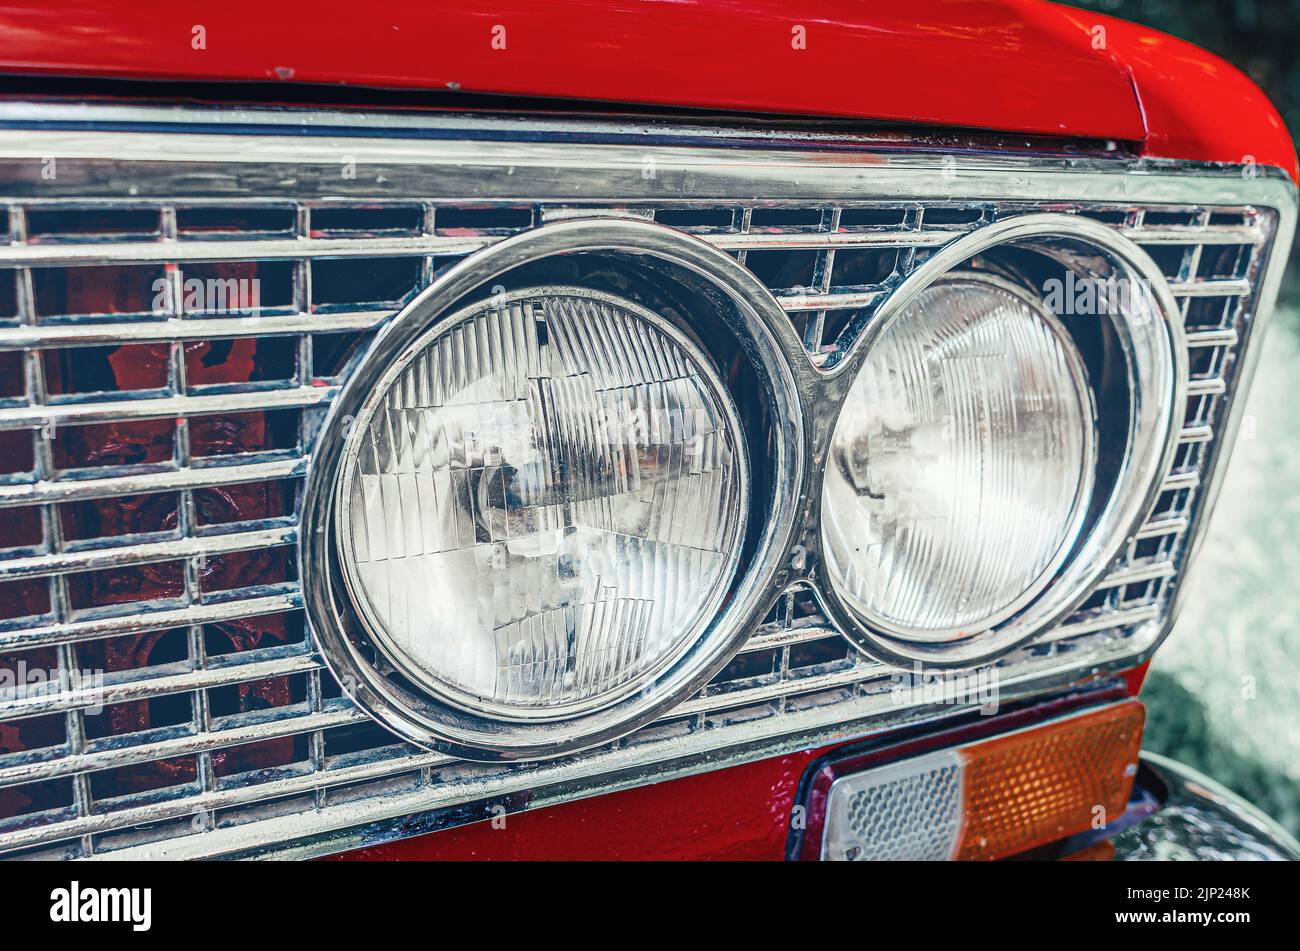 Headlights of red car close-up. Front of old red Lada car. Stock Photo